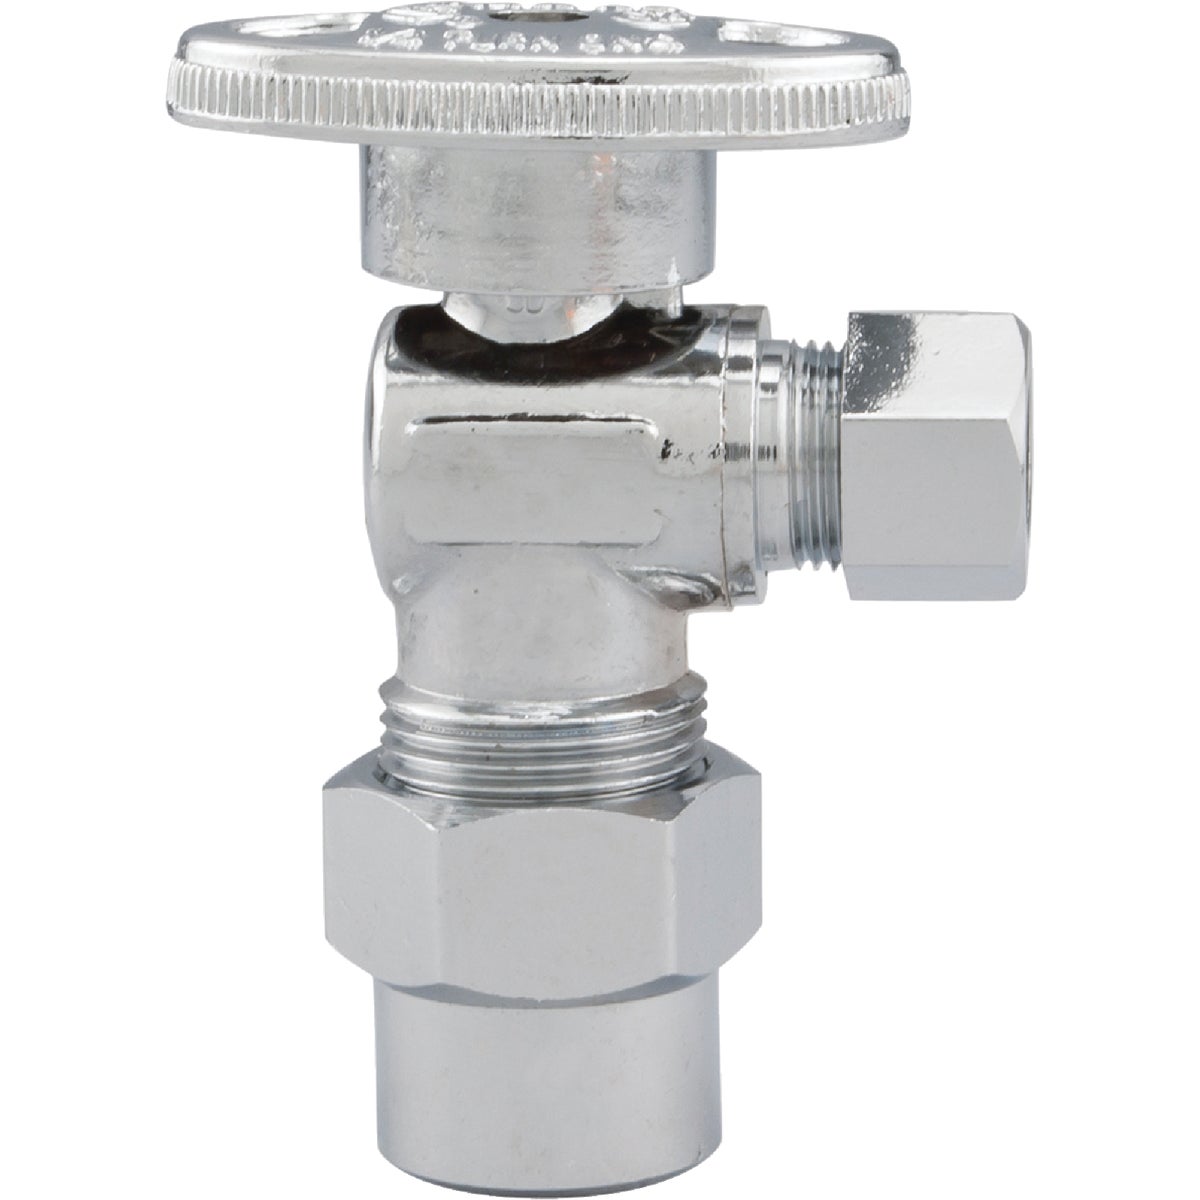 Item 400749, 1/4-turn angle valve controls water flow to household plumbing fixtures.